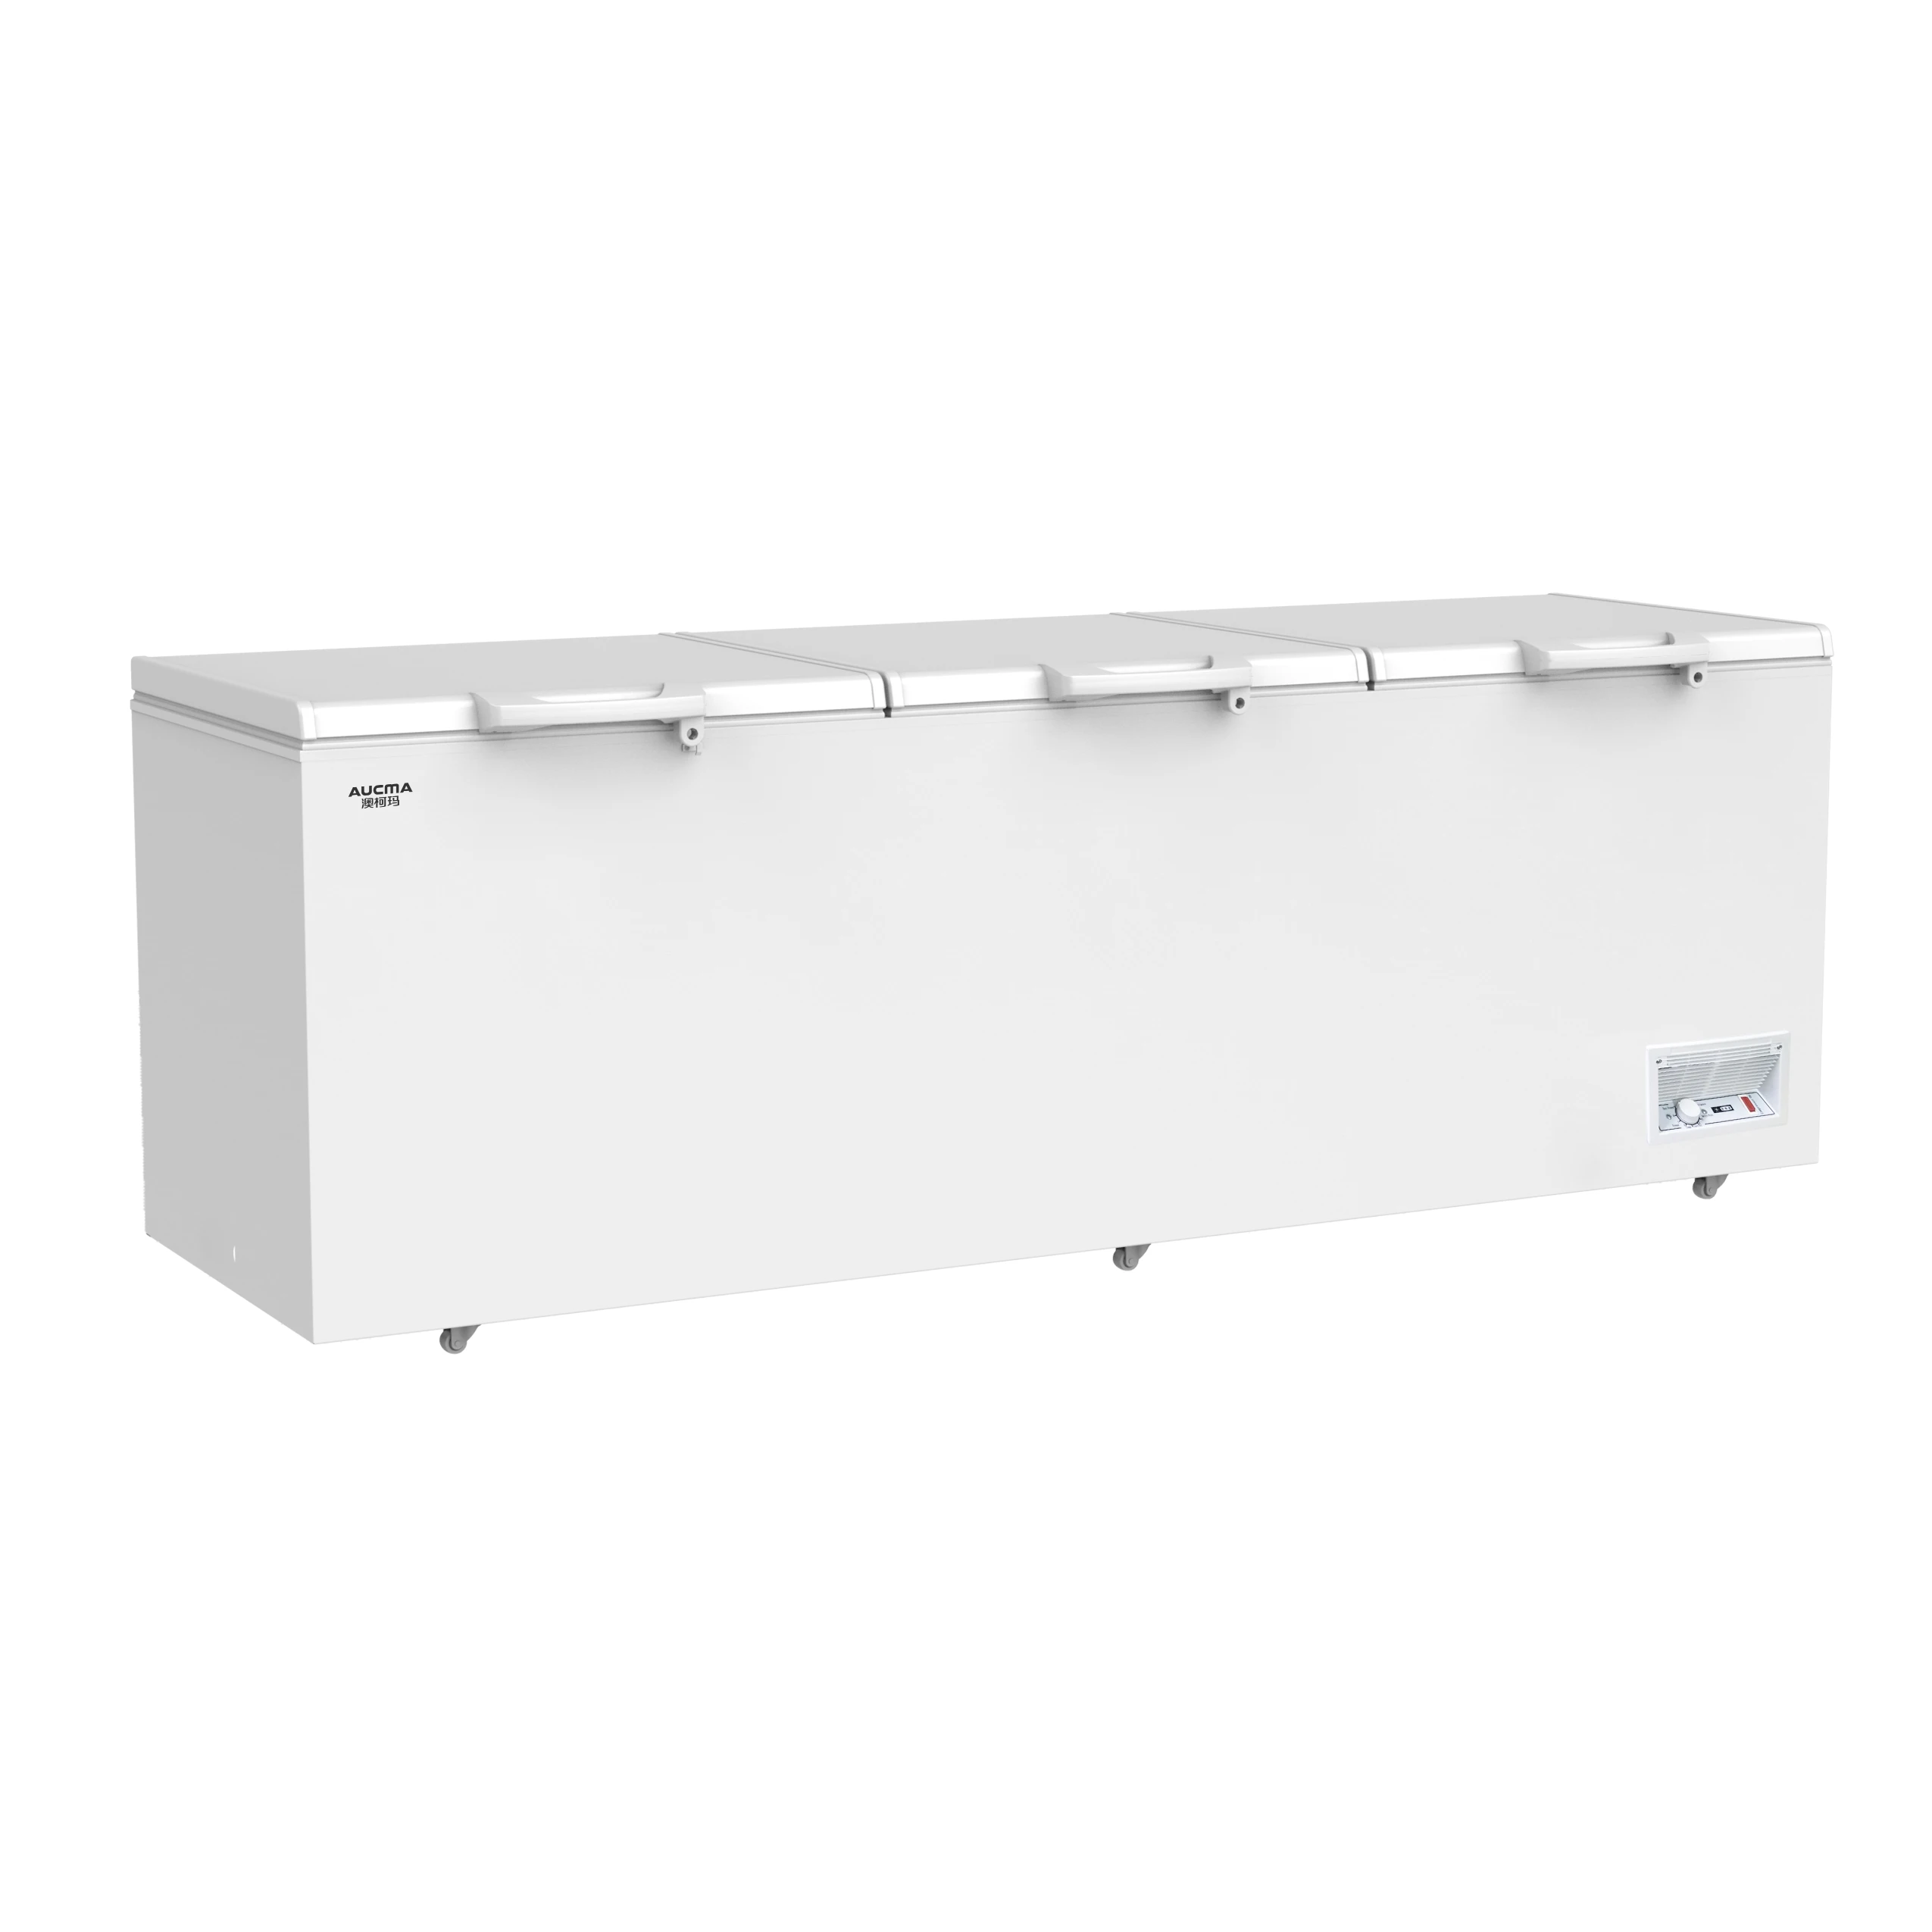 AUCMA AF-1208 Hot New Products refrigerator low temperature preservation meat storage hotel use Chest freezer